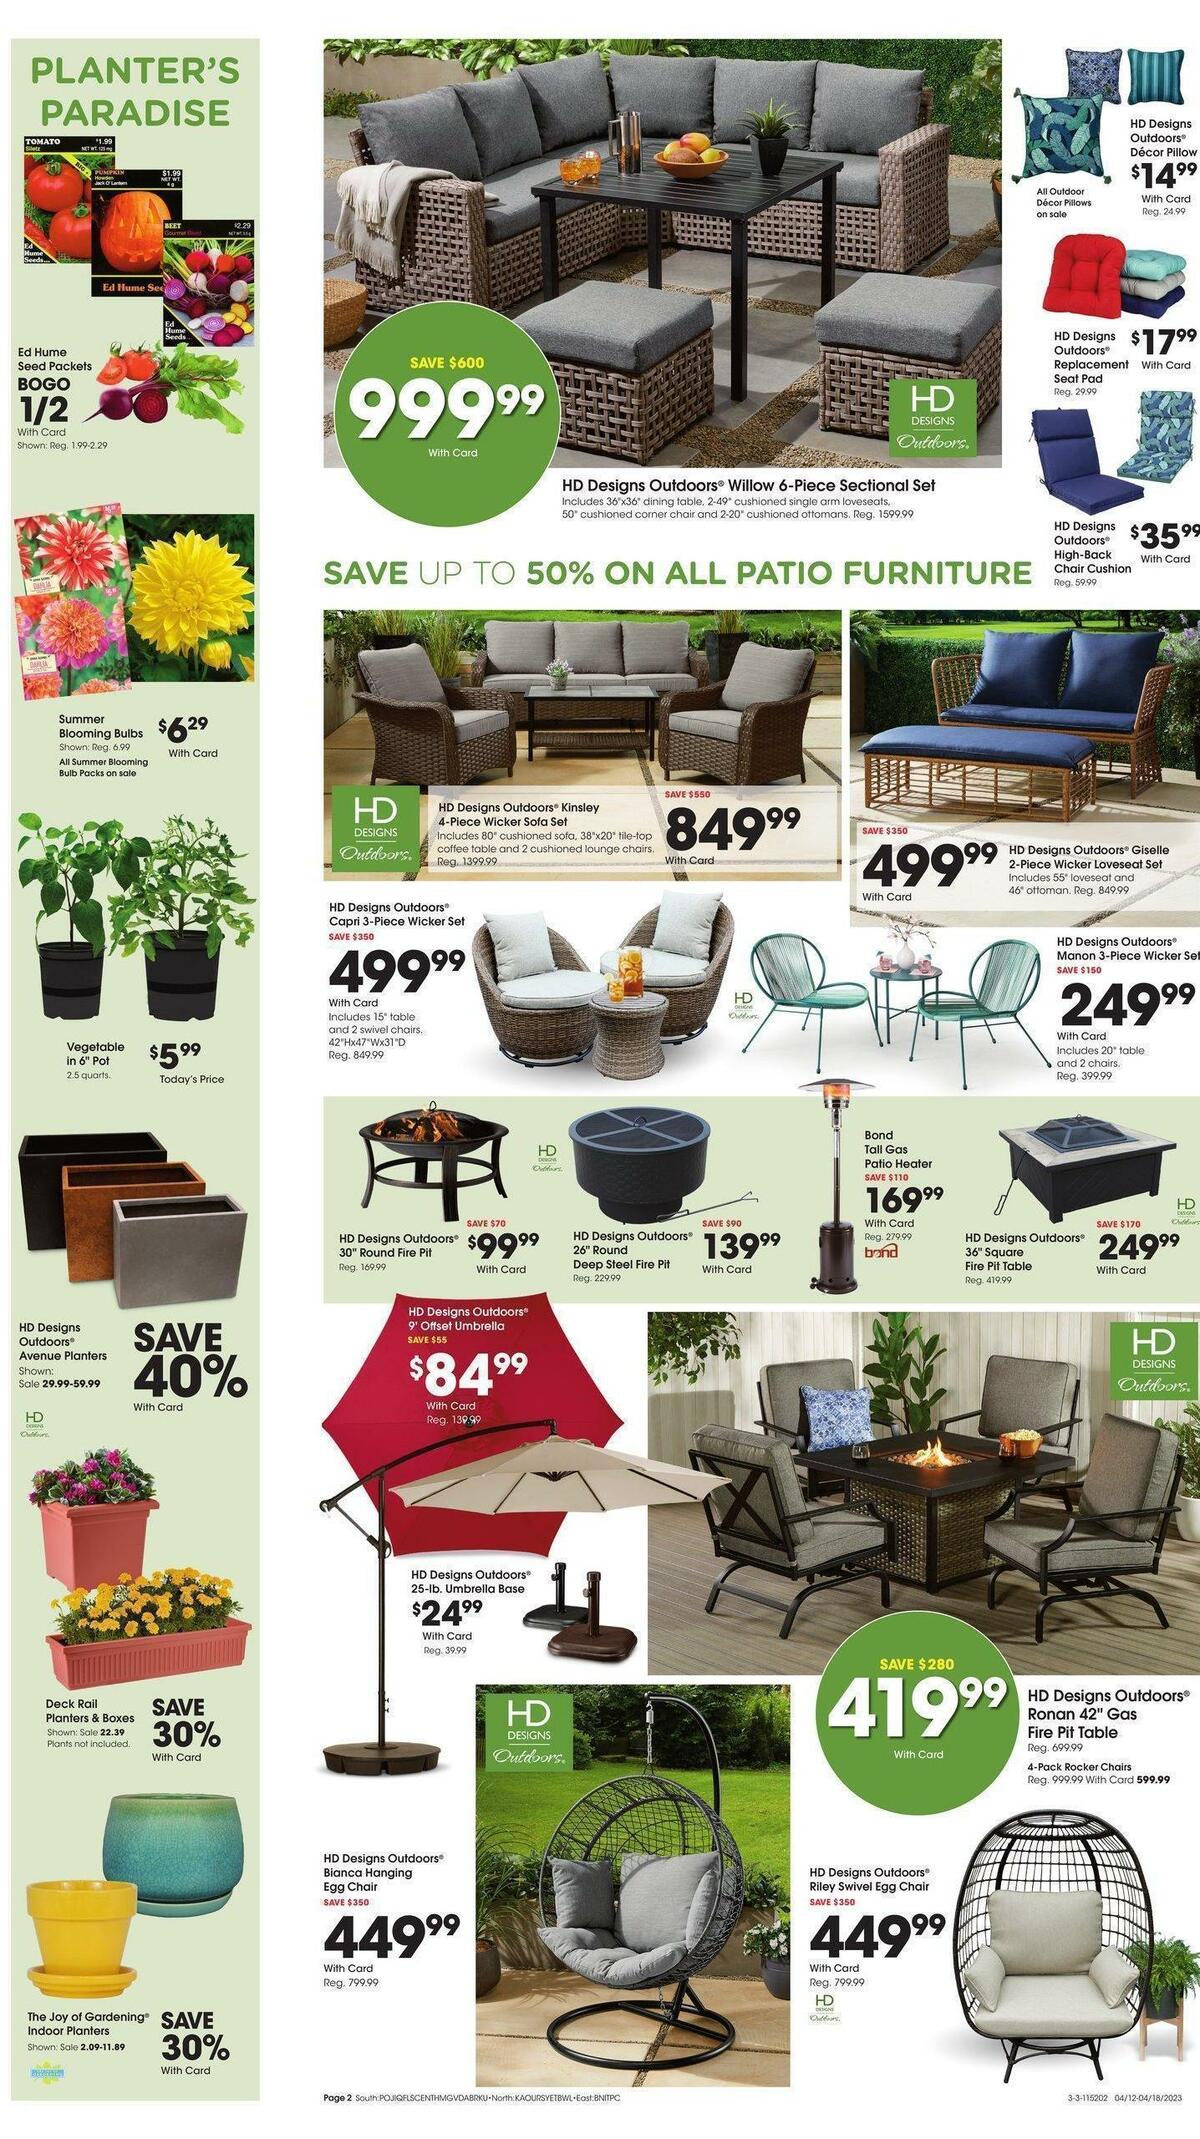 Fred Meyer Garden Weekly Ad from April 12